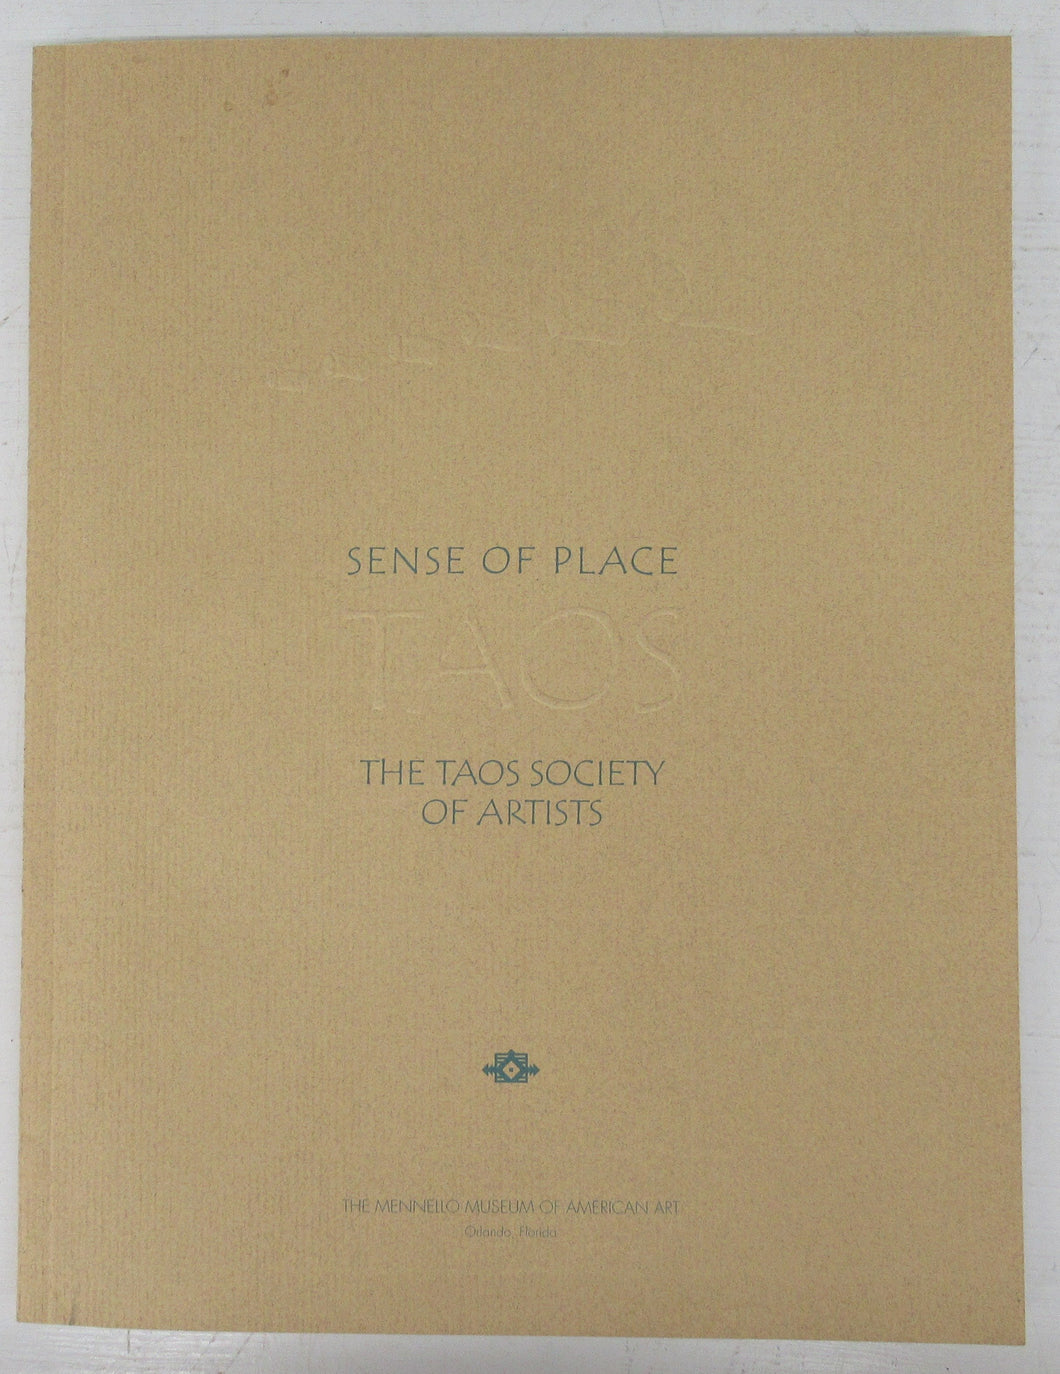 Sense of Place: The Taos Society of Artists